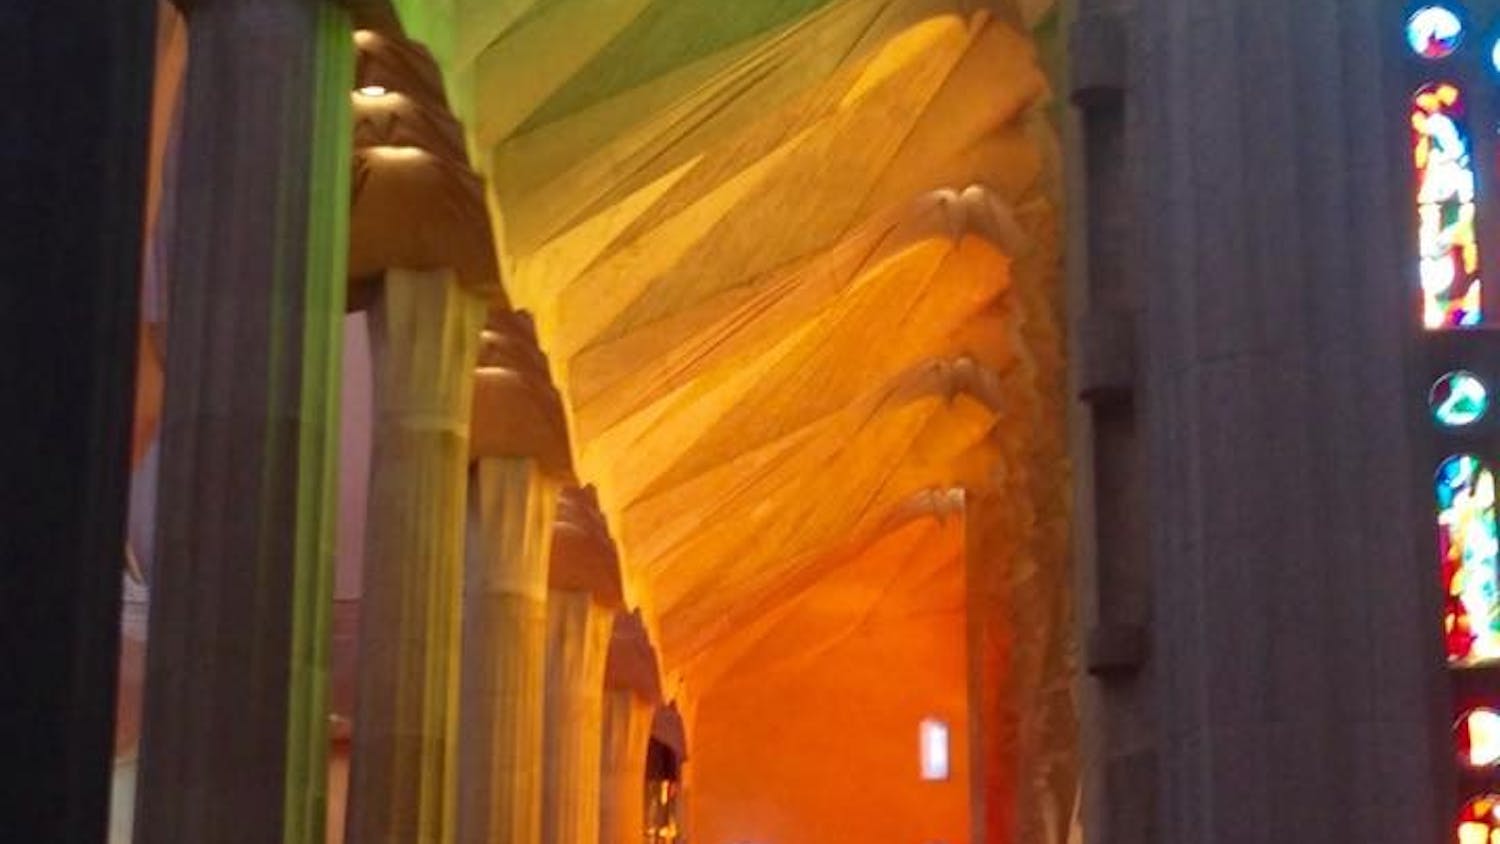 Effect of the stained glass windows on the inside of the Sagrada Familia.